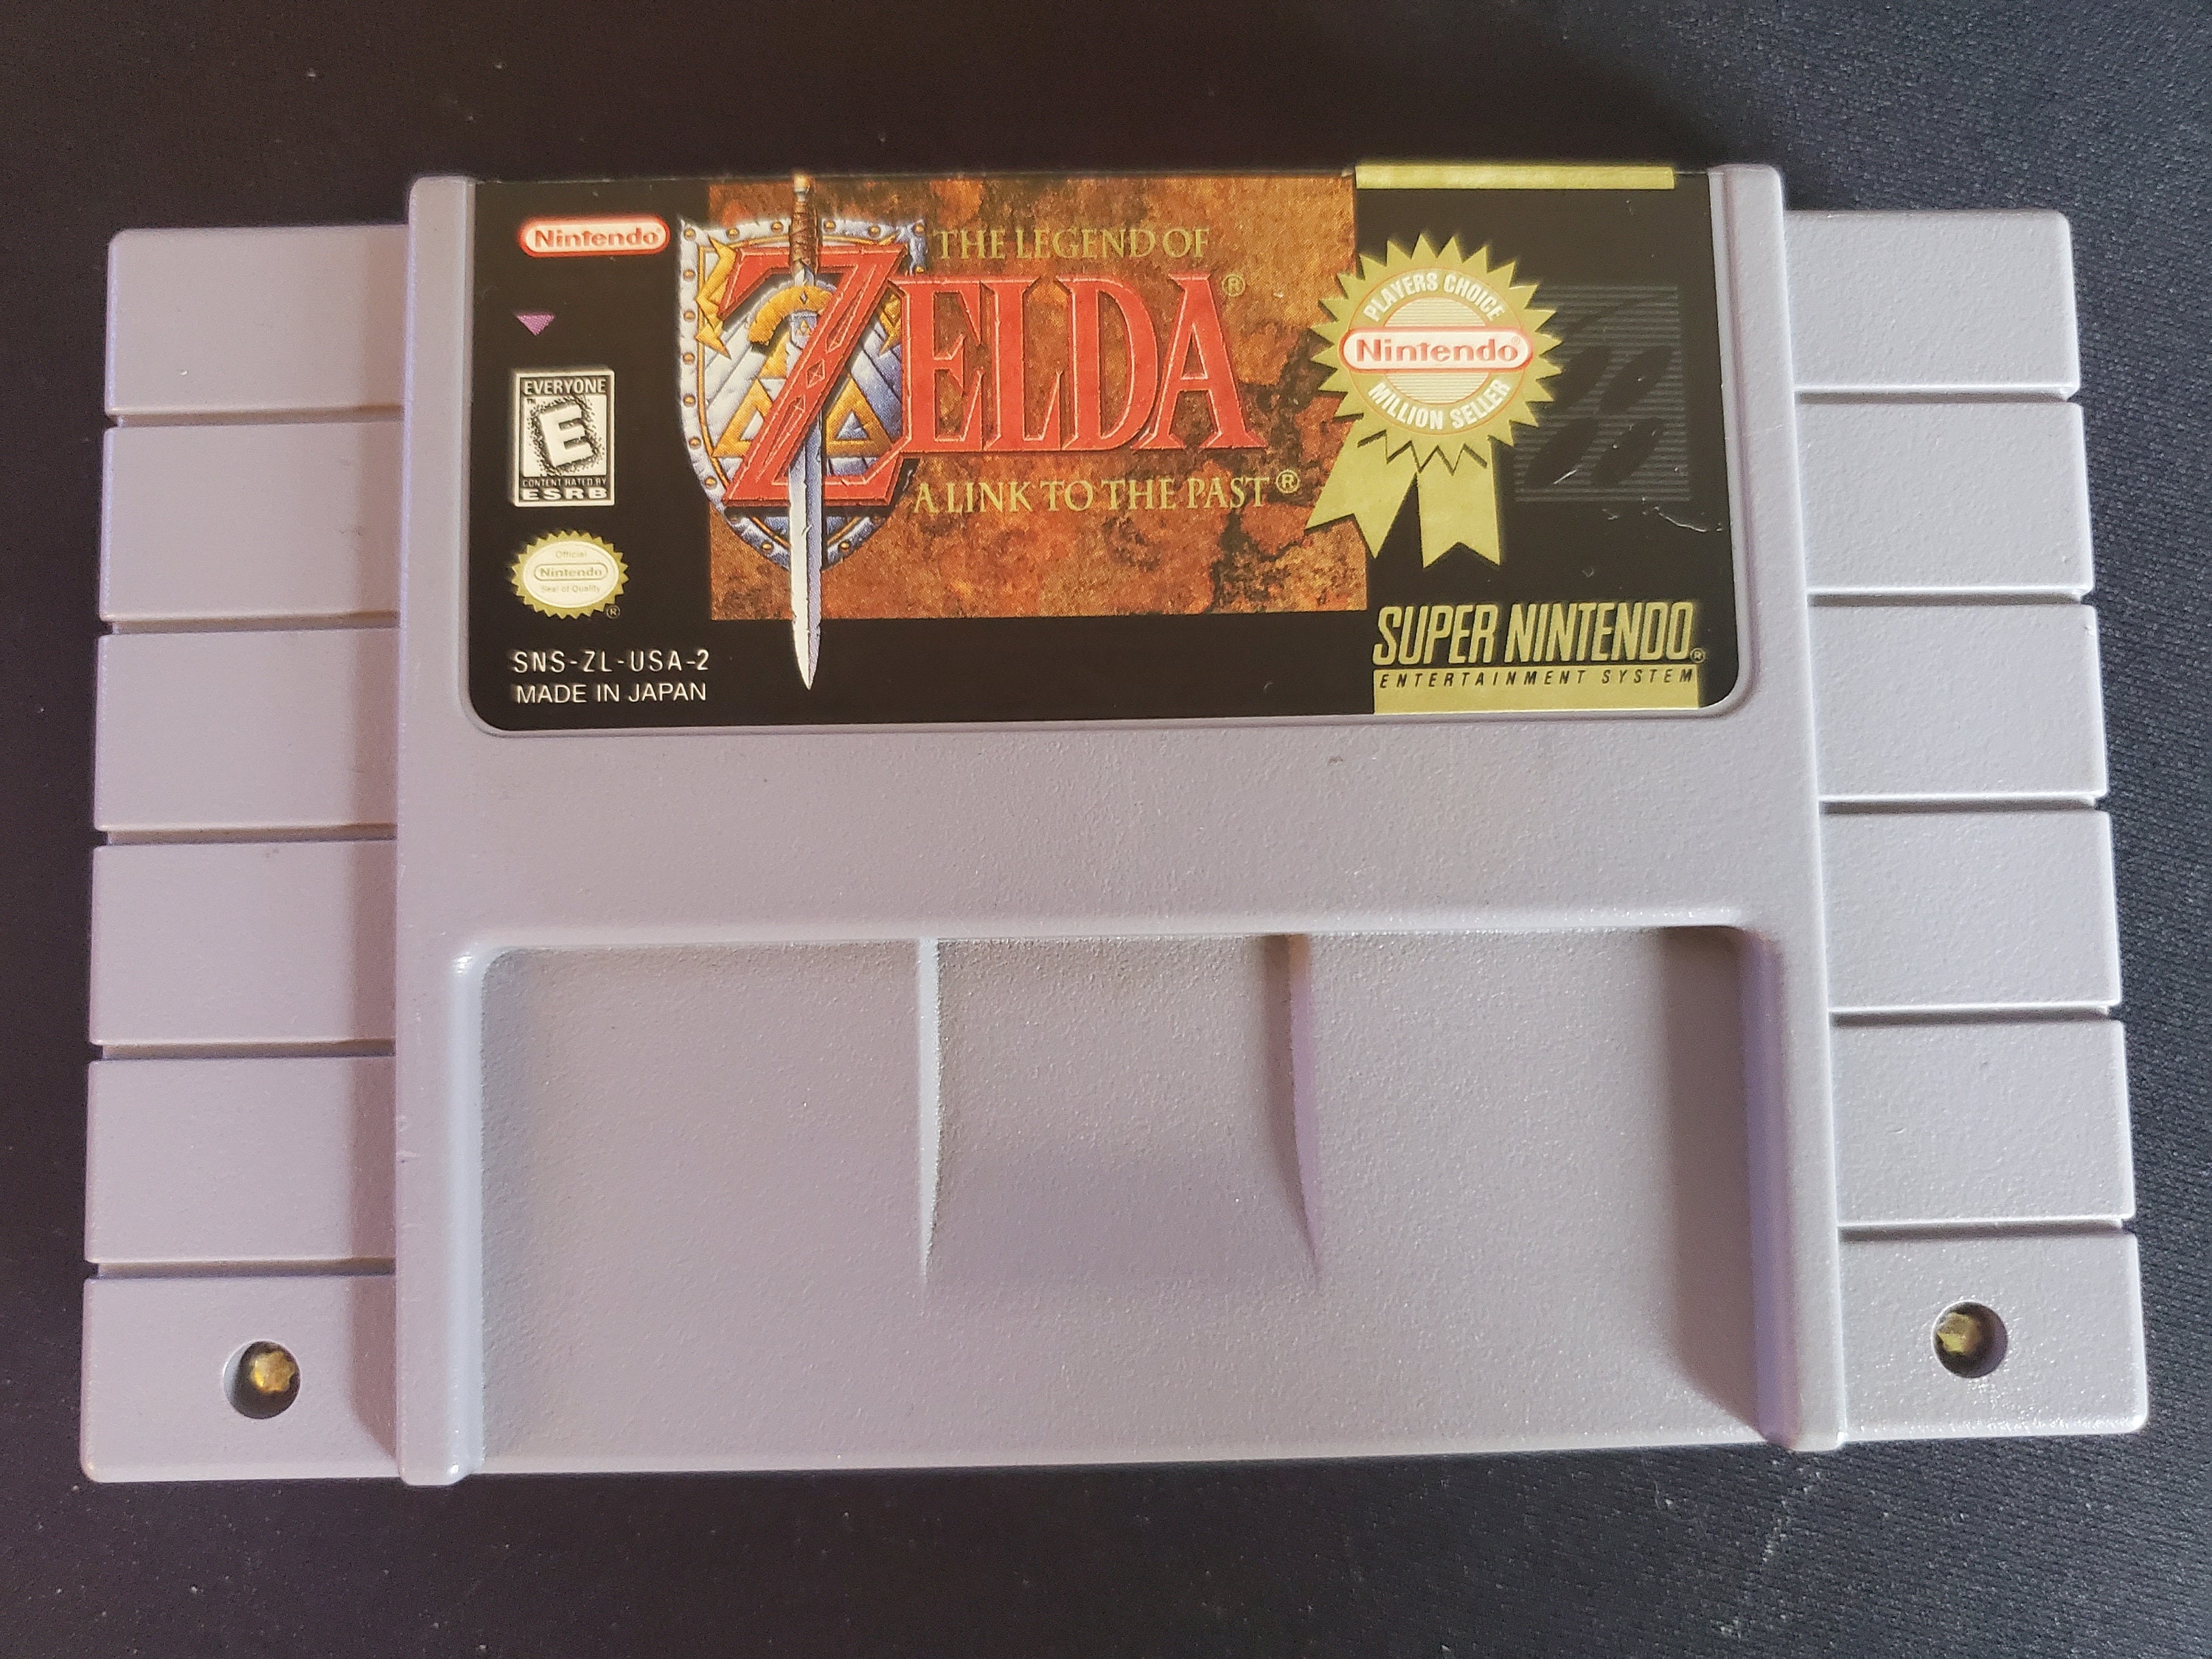 The Legend of Zelda Link to the Past player's Choice 